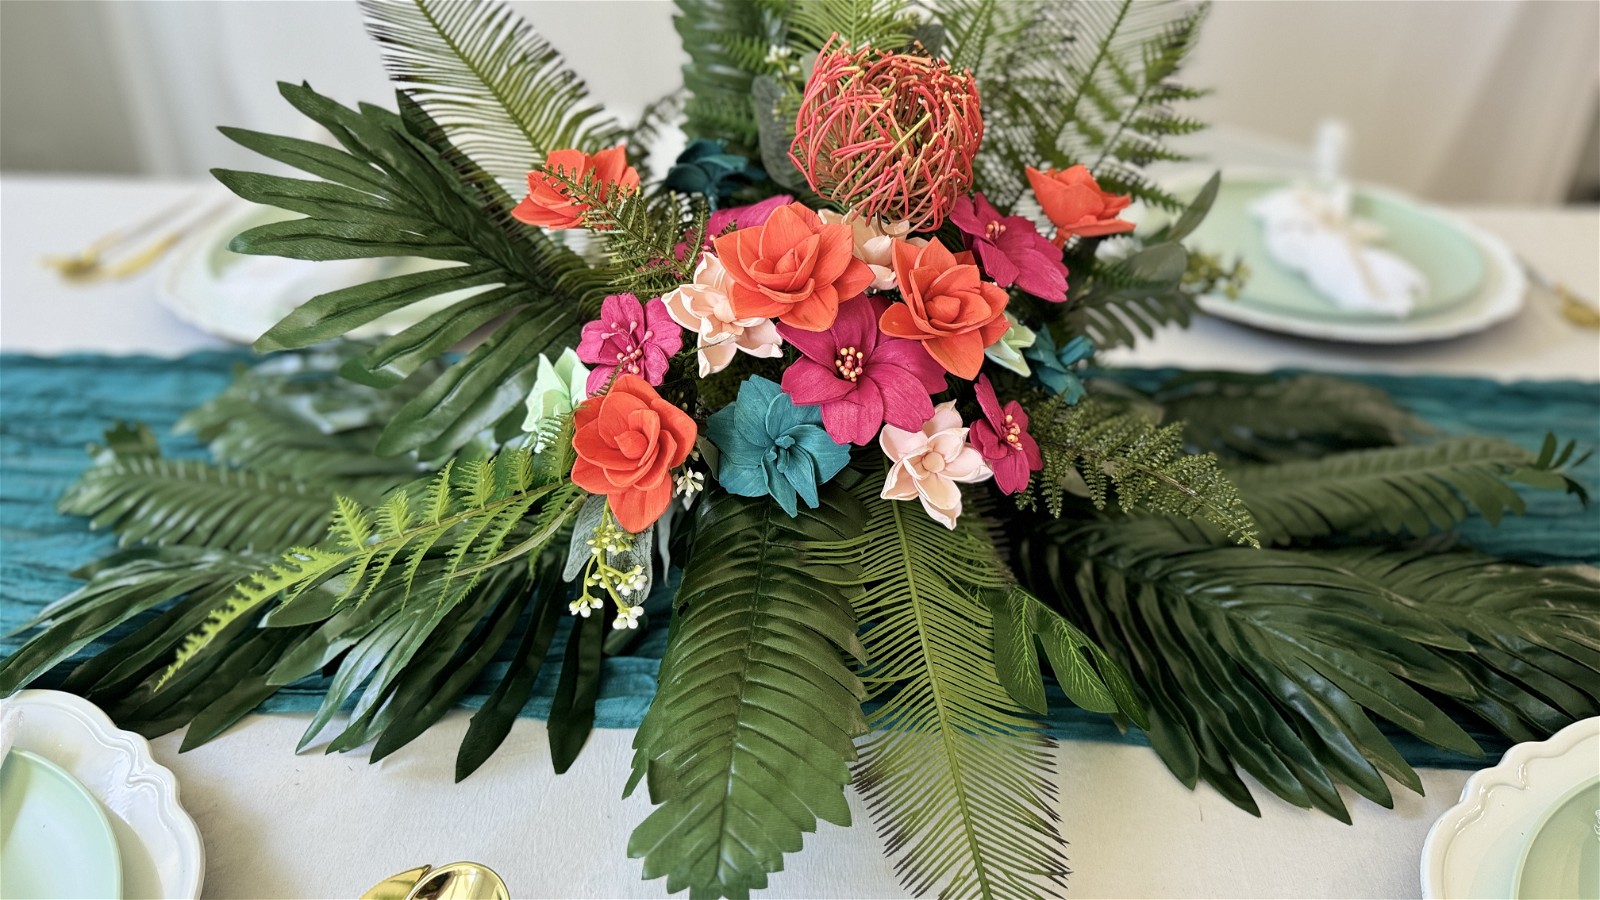 Image of Tropical Cereal Bowl Arrangement - DIY Wedding Centerpiece Step-by-Step Instructions